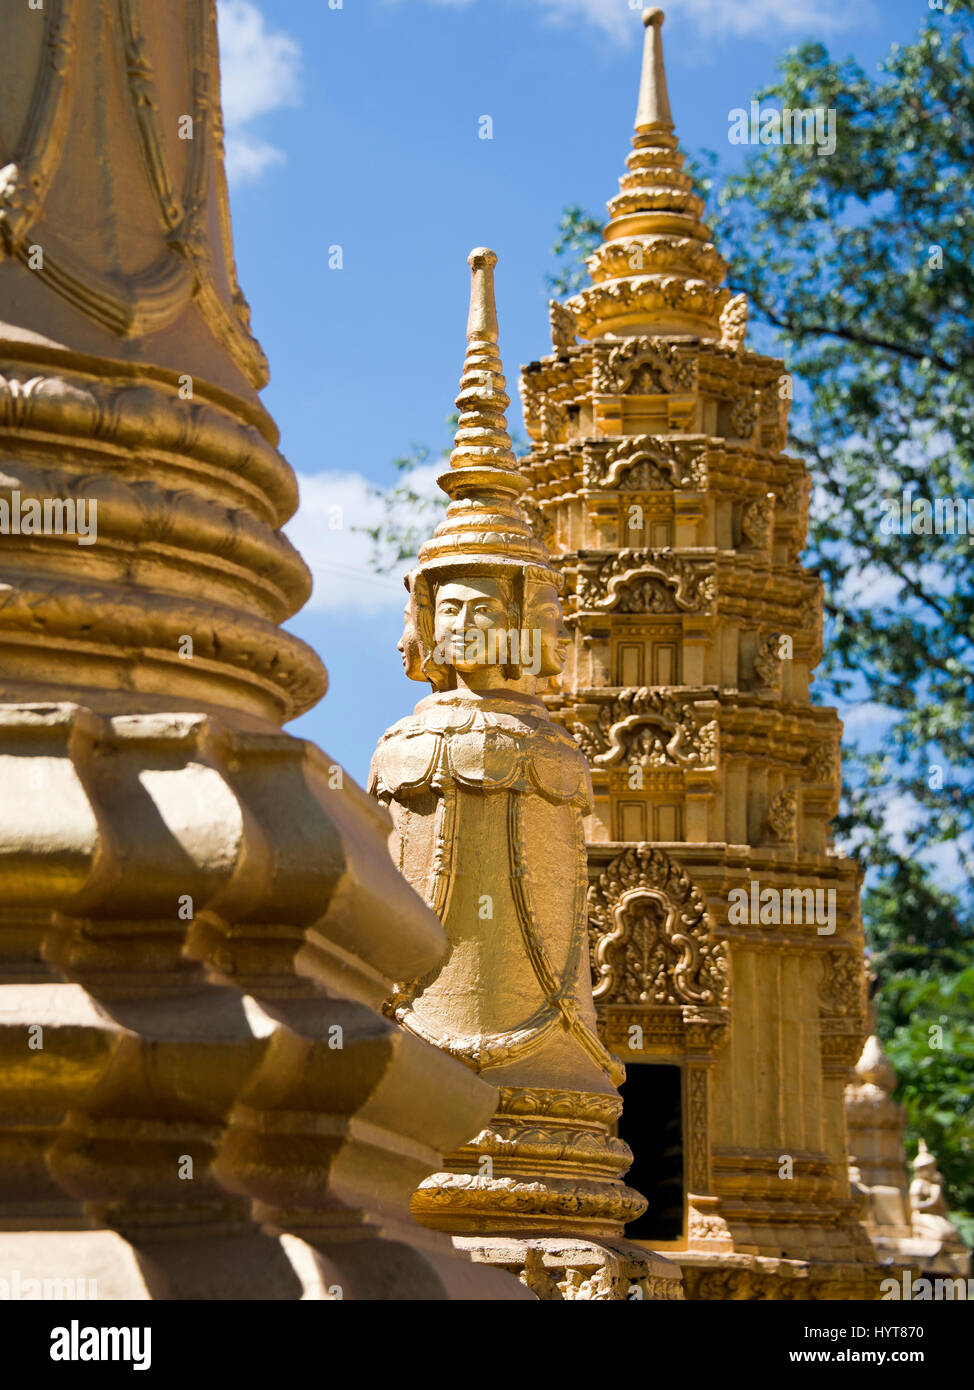 Vertical close up of gold statues at Wat Preah Prom Rath in Siem Reap, Cambodia. Stock Photo